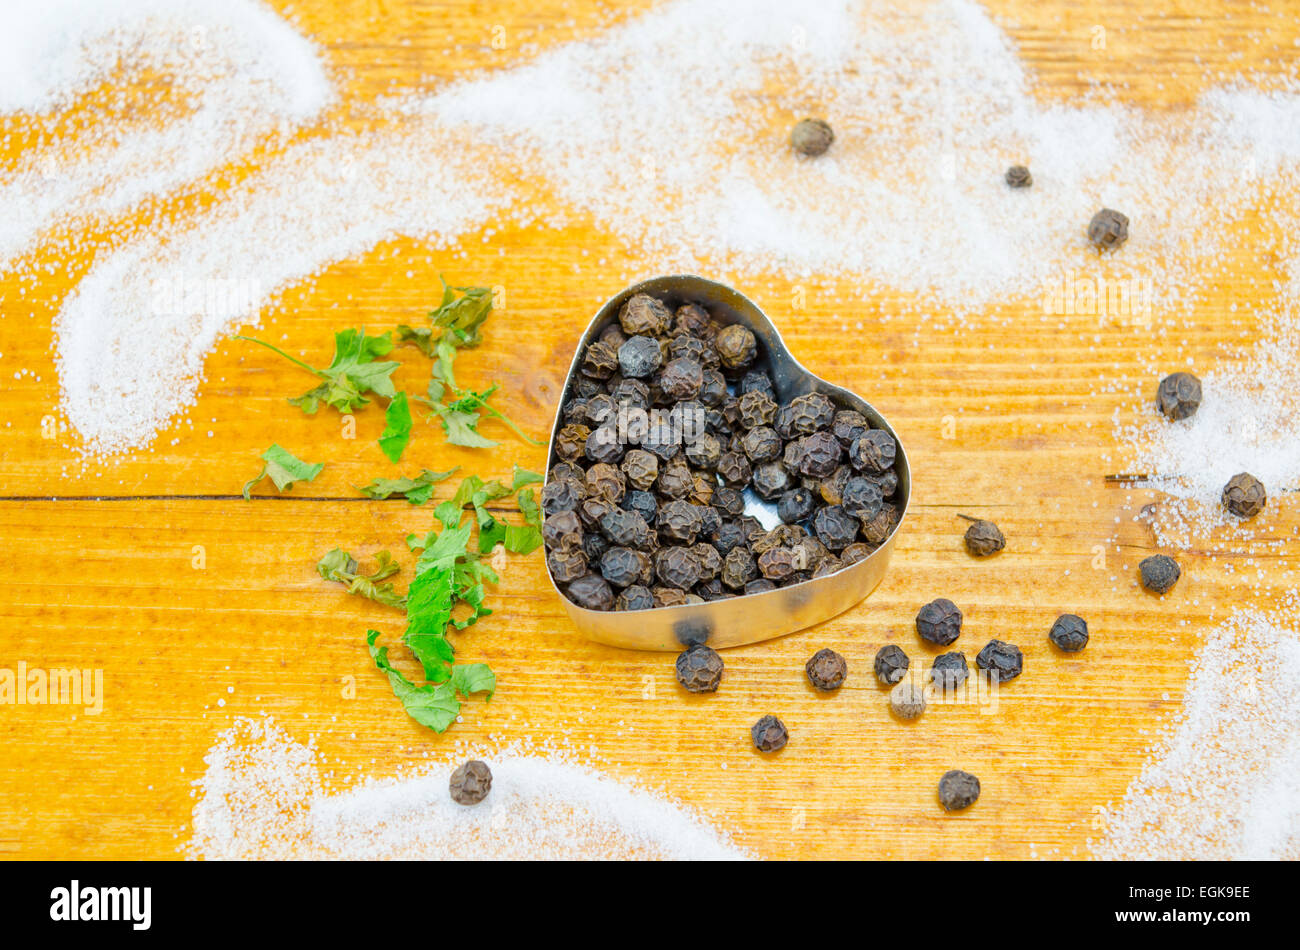 Black pepper in a hear shaped container decorated with basil on a wooden table sprayed with salt Stock Photo